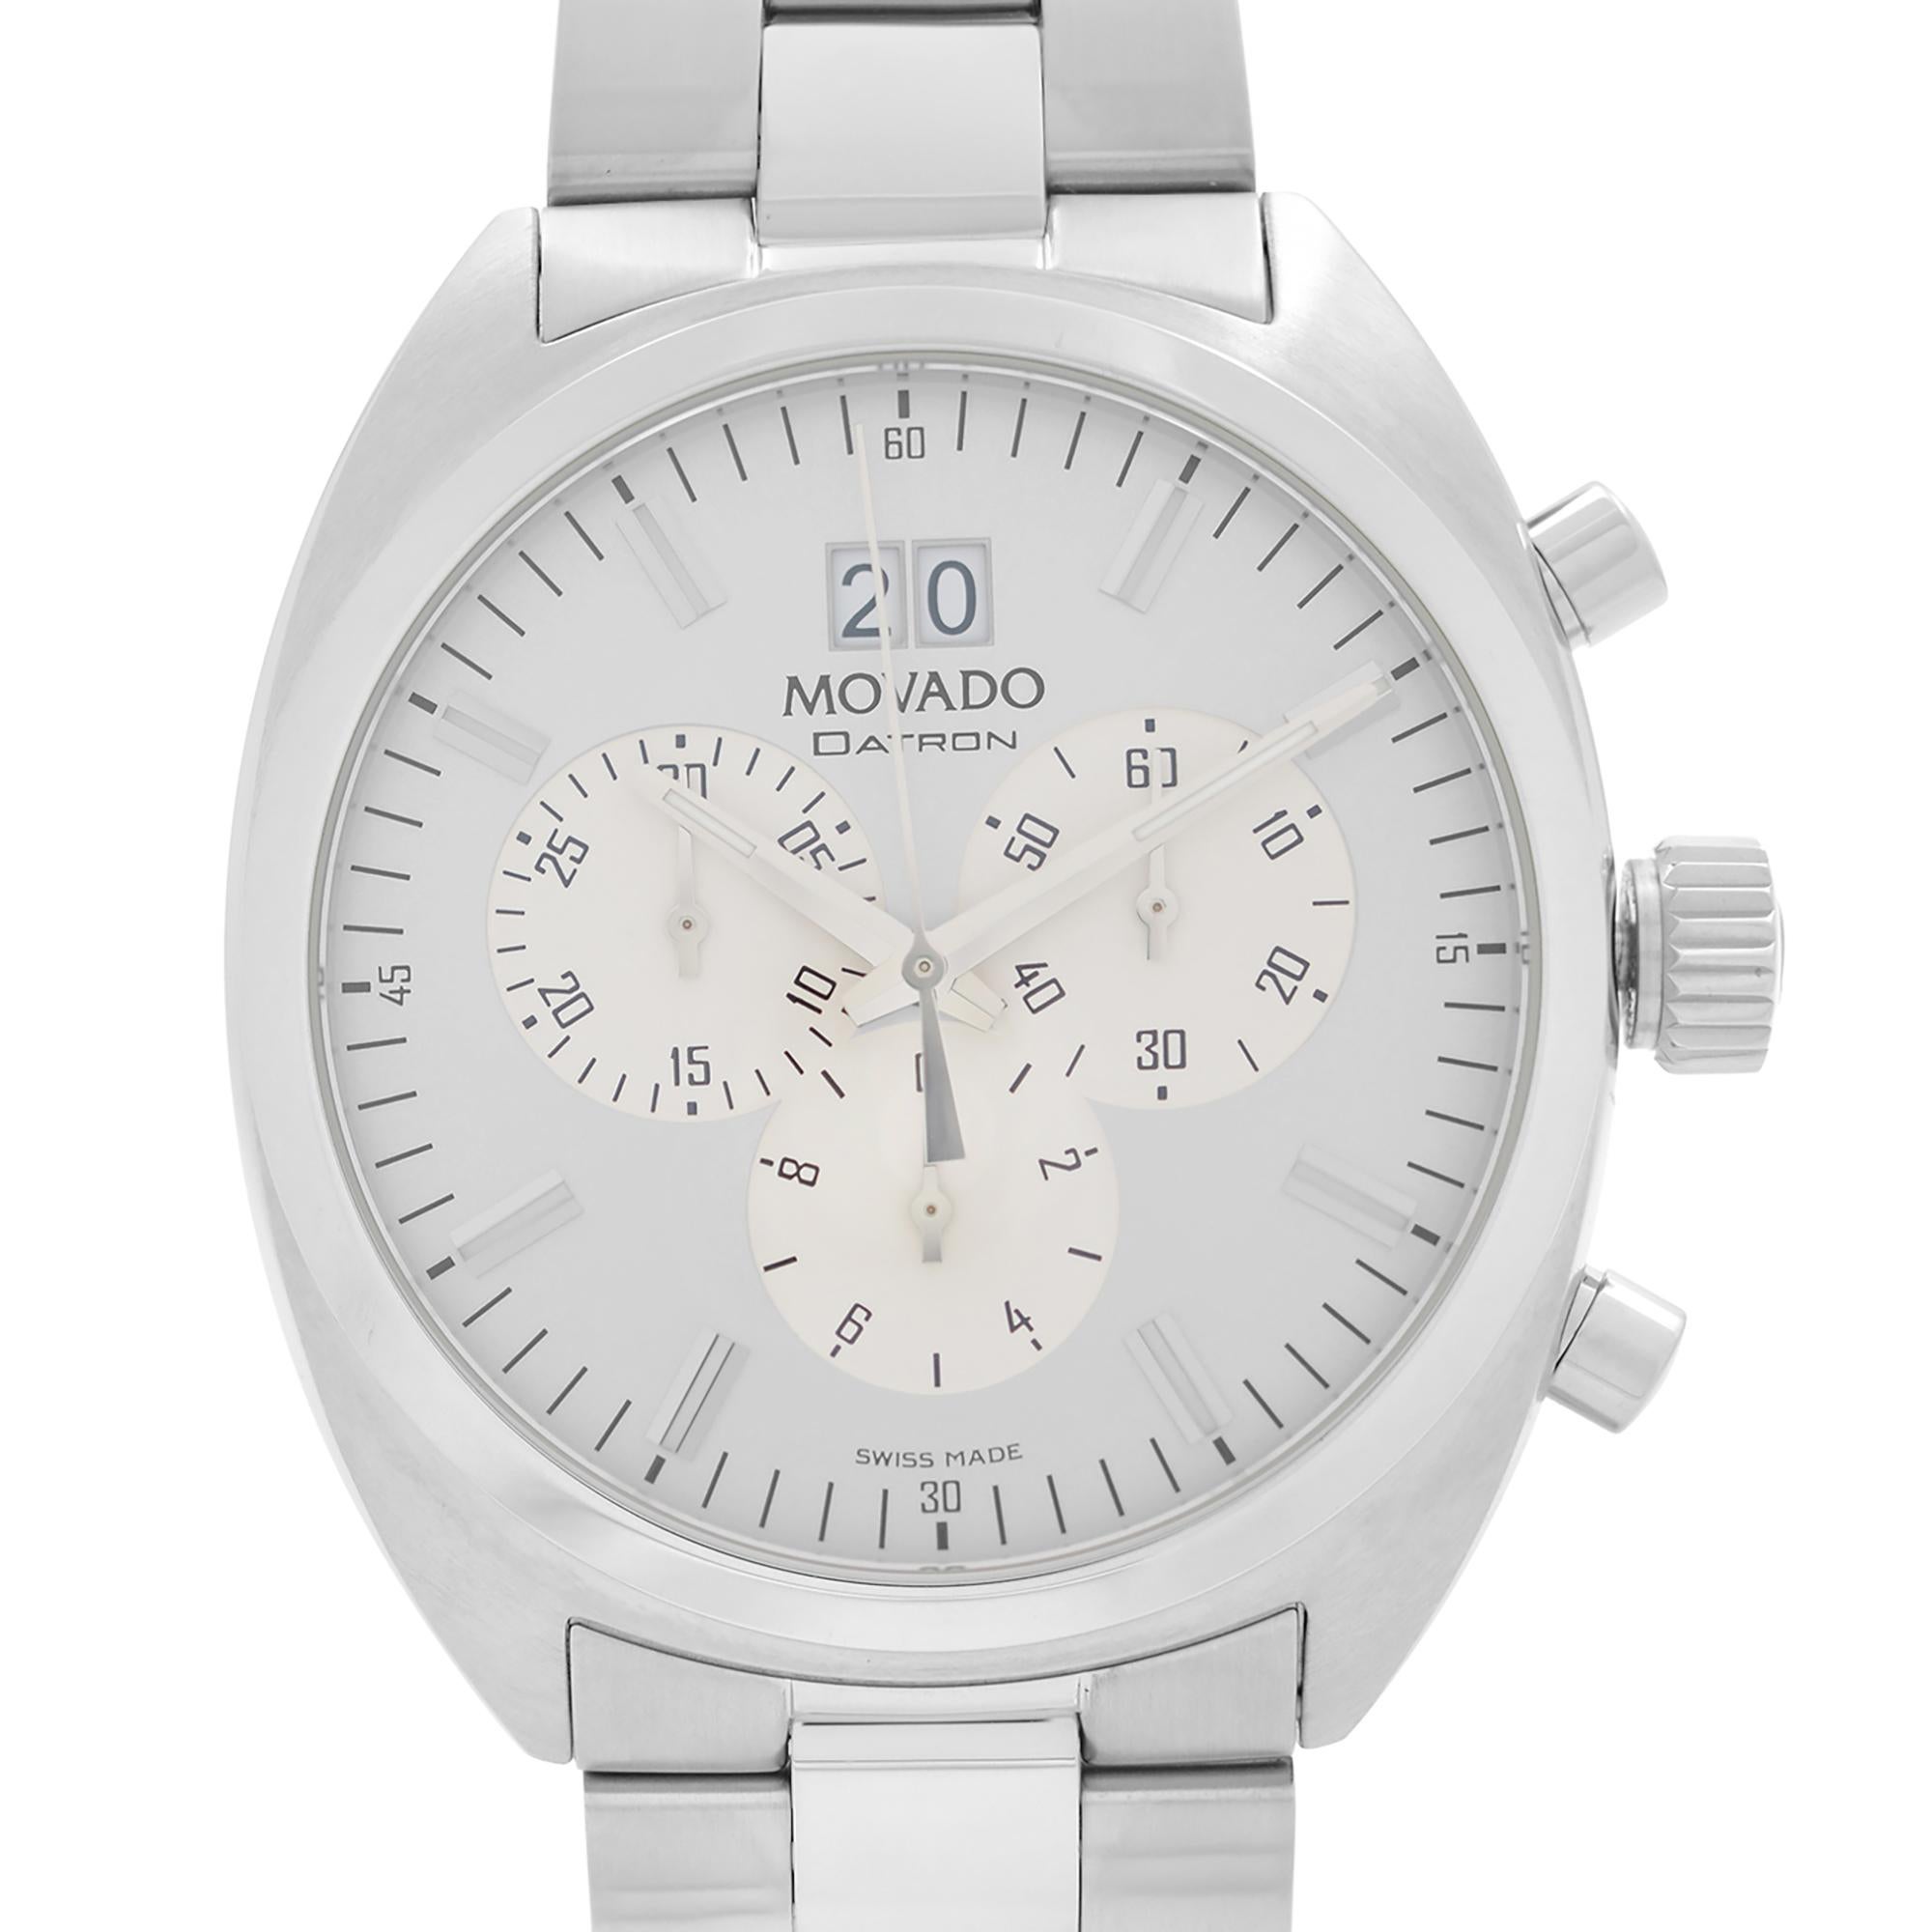 Store Display Model Movado Datron Stainless Steel Chronograph Silver Dial Quartz Men's Watch 0606477. Original Box and Papers are Included. Covered by 1-year Chronostore Warranty. 
Details:
MSRP 1495
Brand Movado
Department Men
Model Number